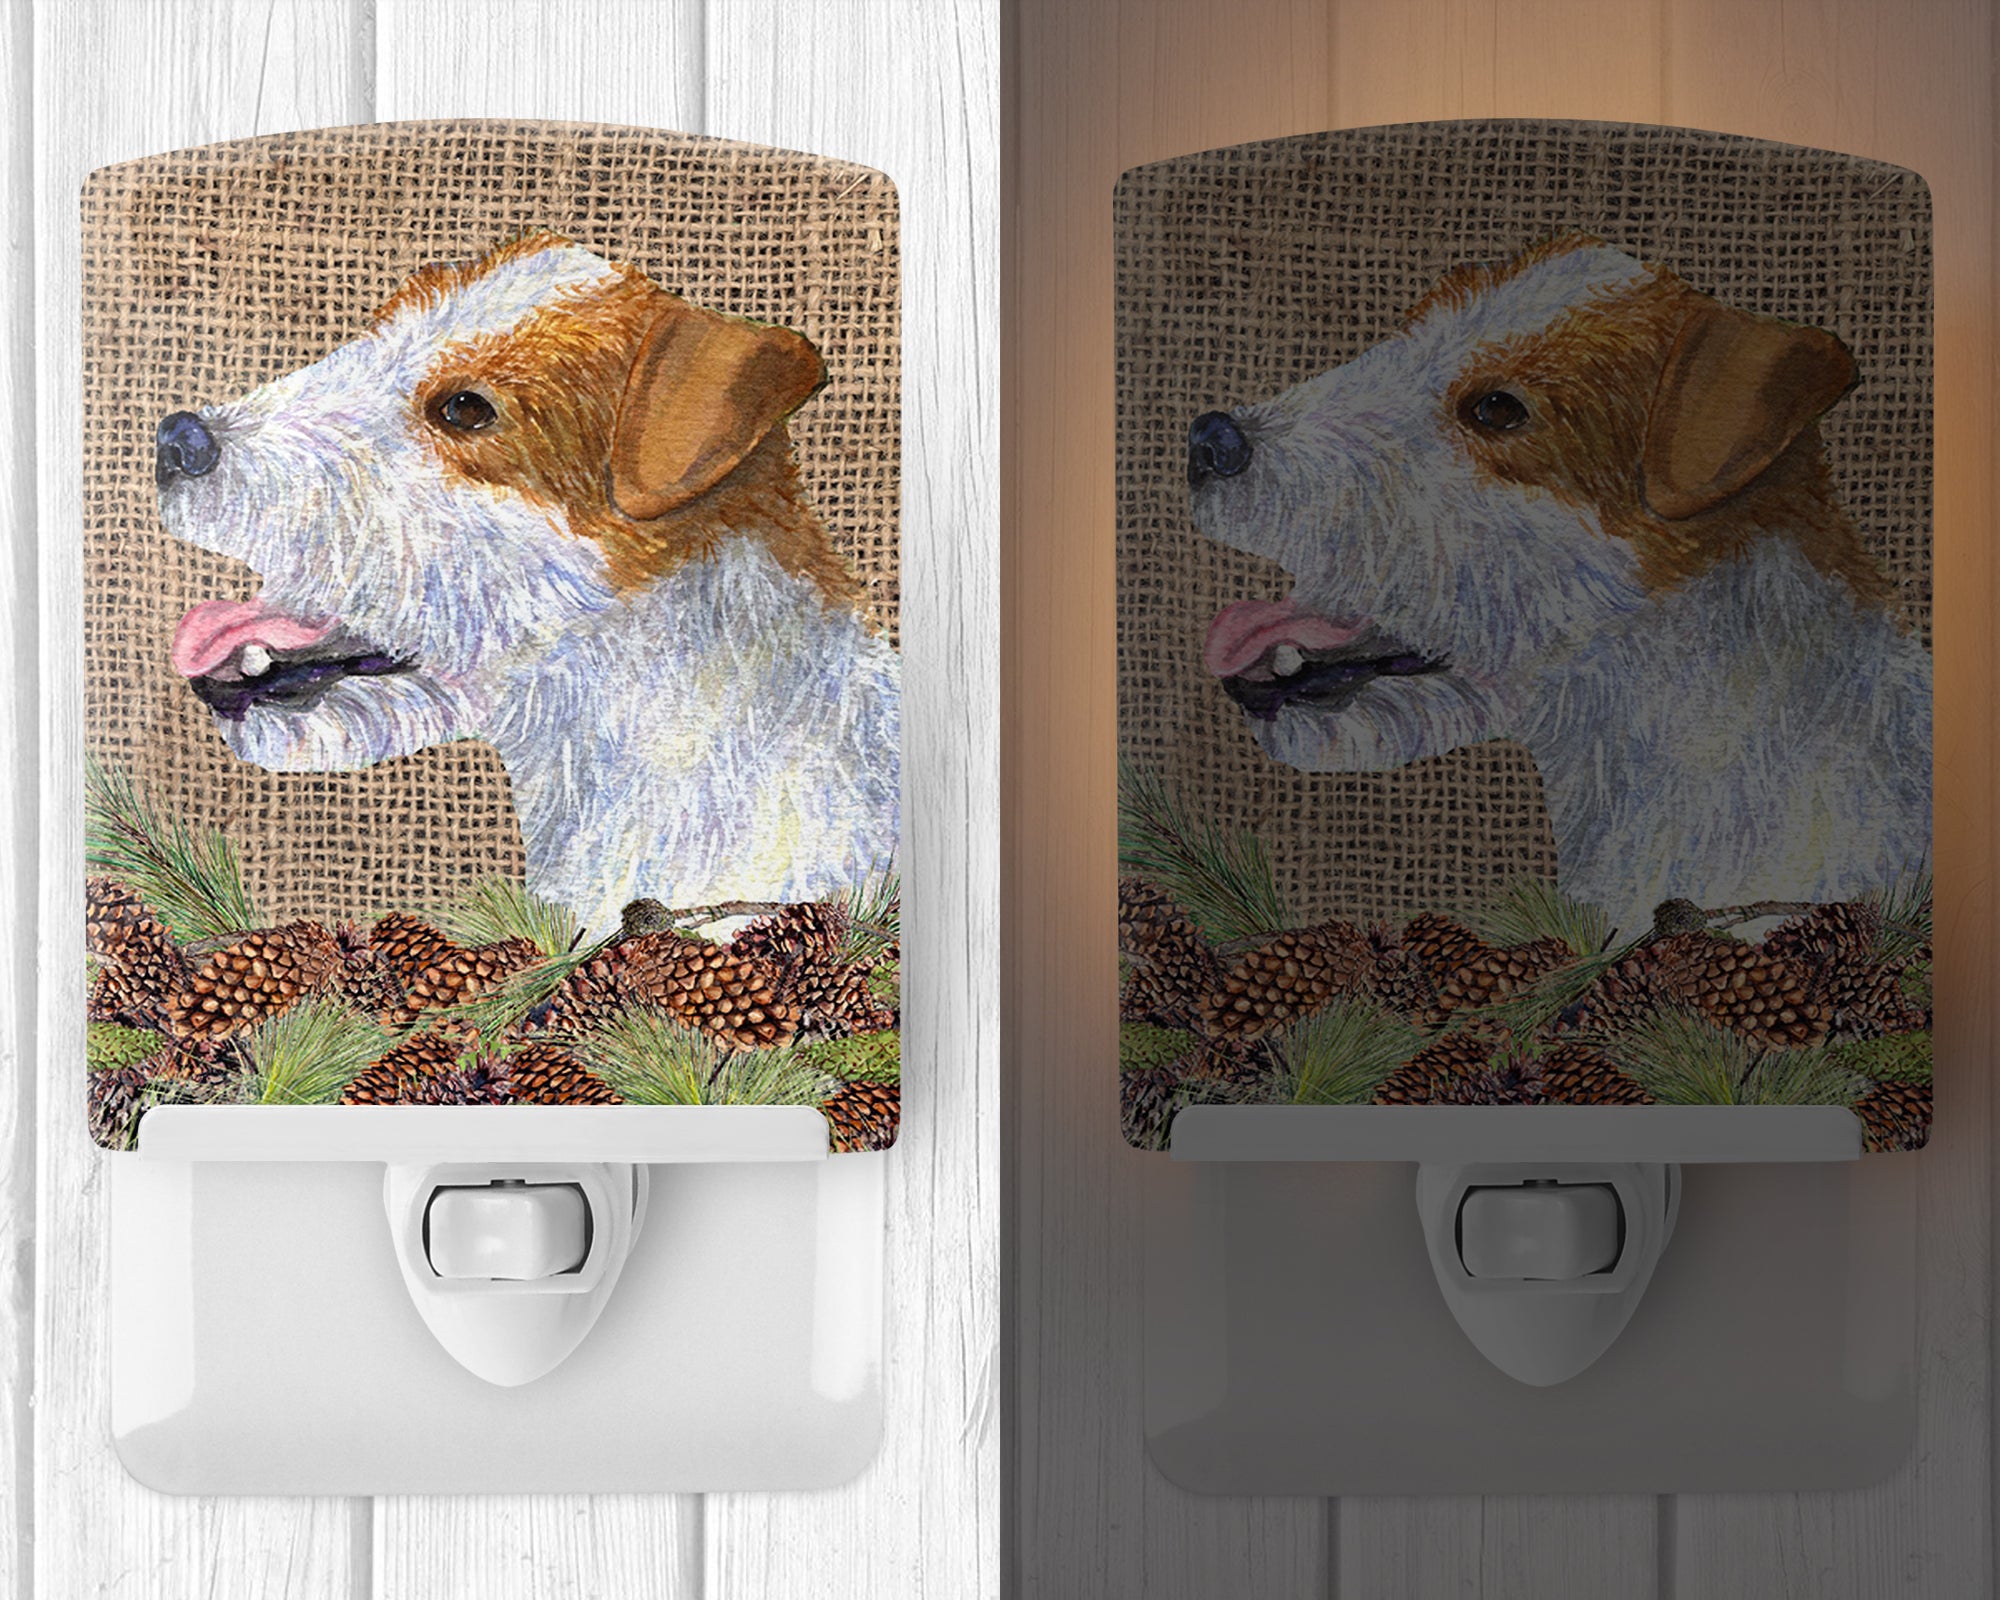 Jack Russell Terrier on Faux Burlap with Pine Cones Ceramic Night Light SS4093CNL - the-store.com